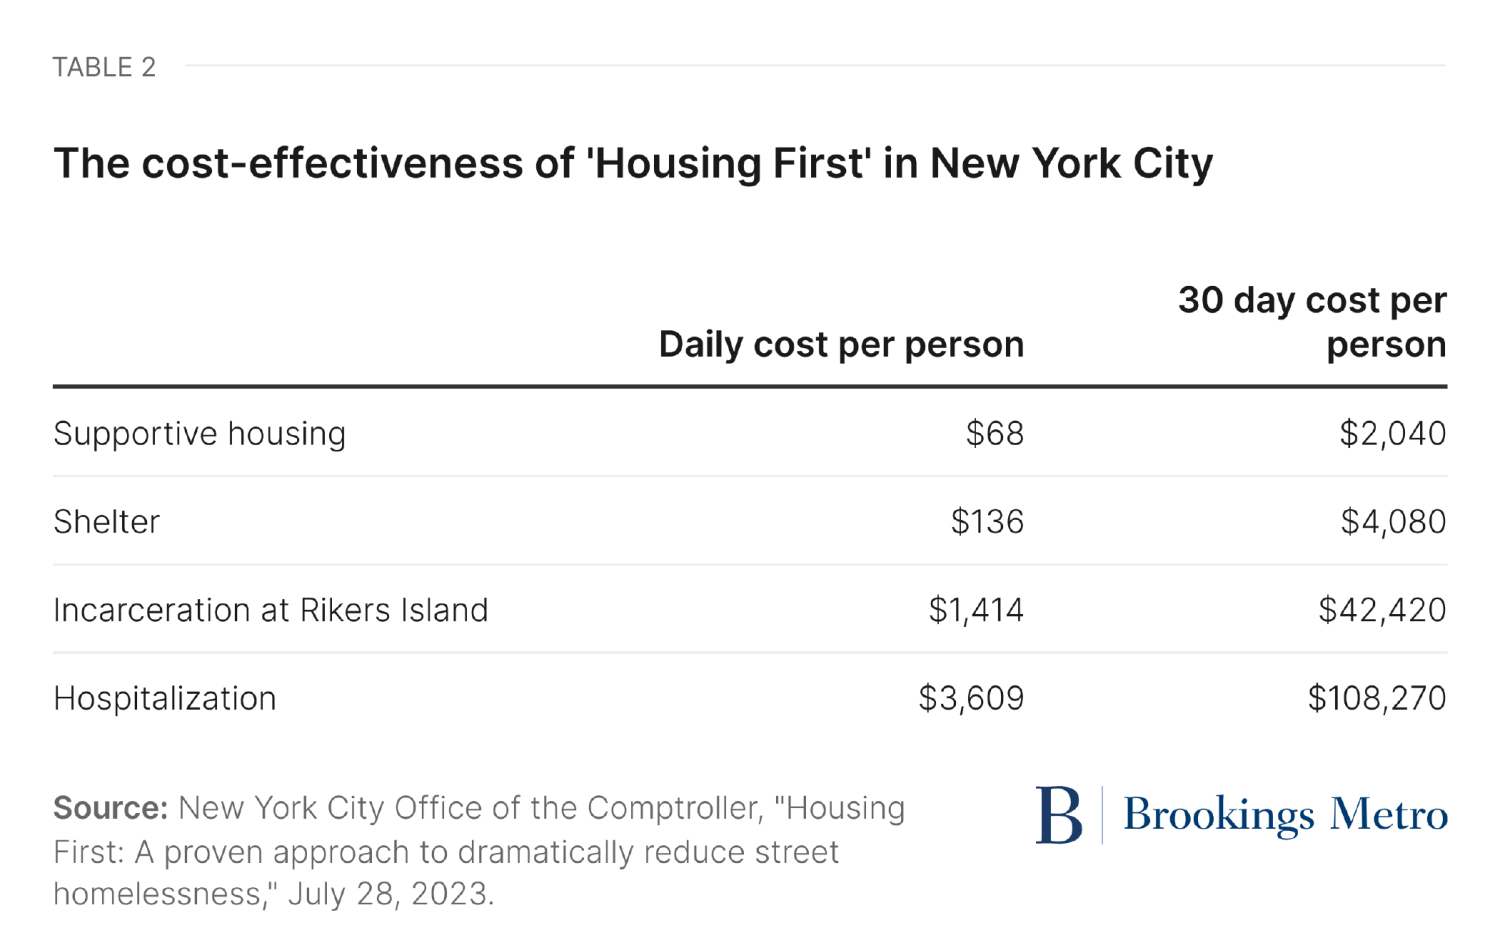 Table 2. The cost-effectiveness of 'Housing First' in New York City